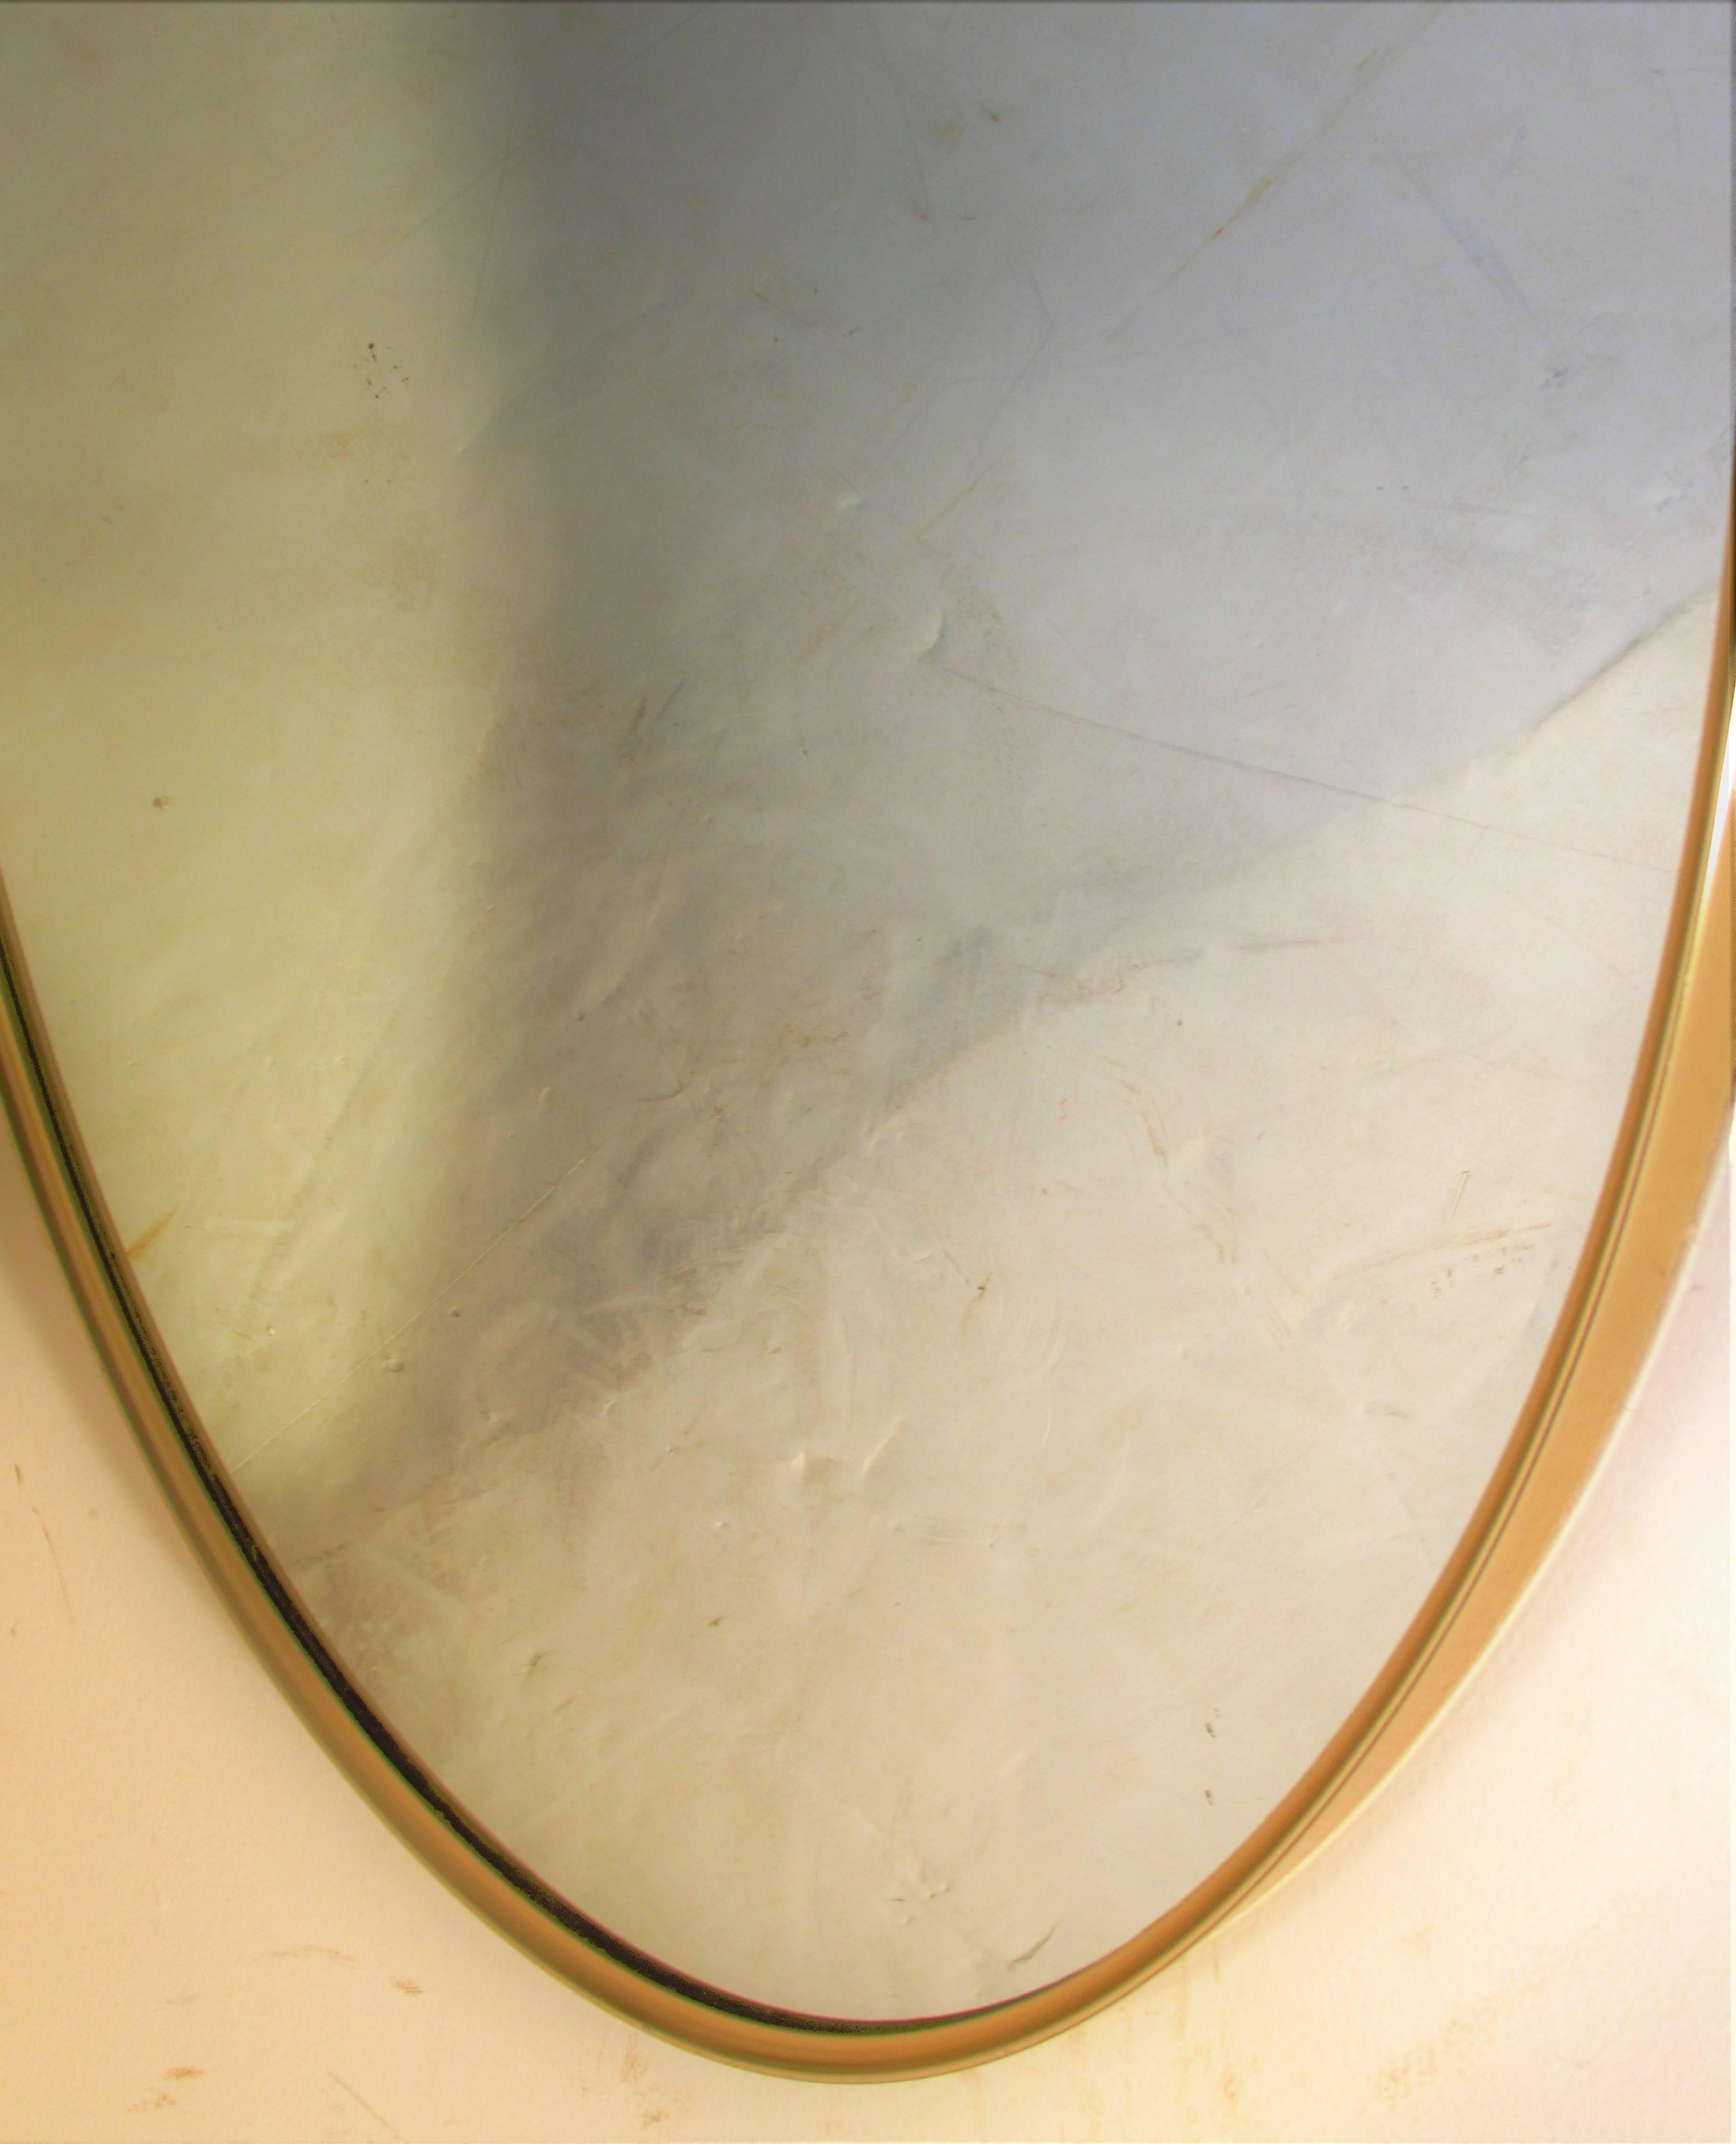 Oval brass framed mirror mounted with original ring finial at top in the 1960s Italian modernist style of Gio Ponti.